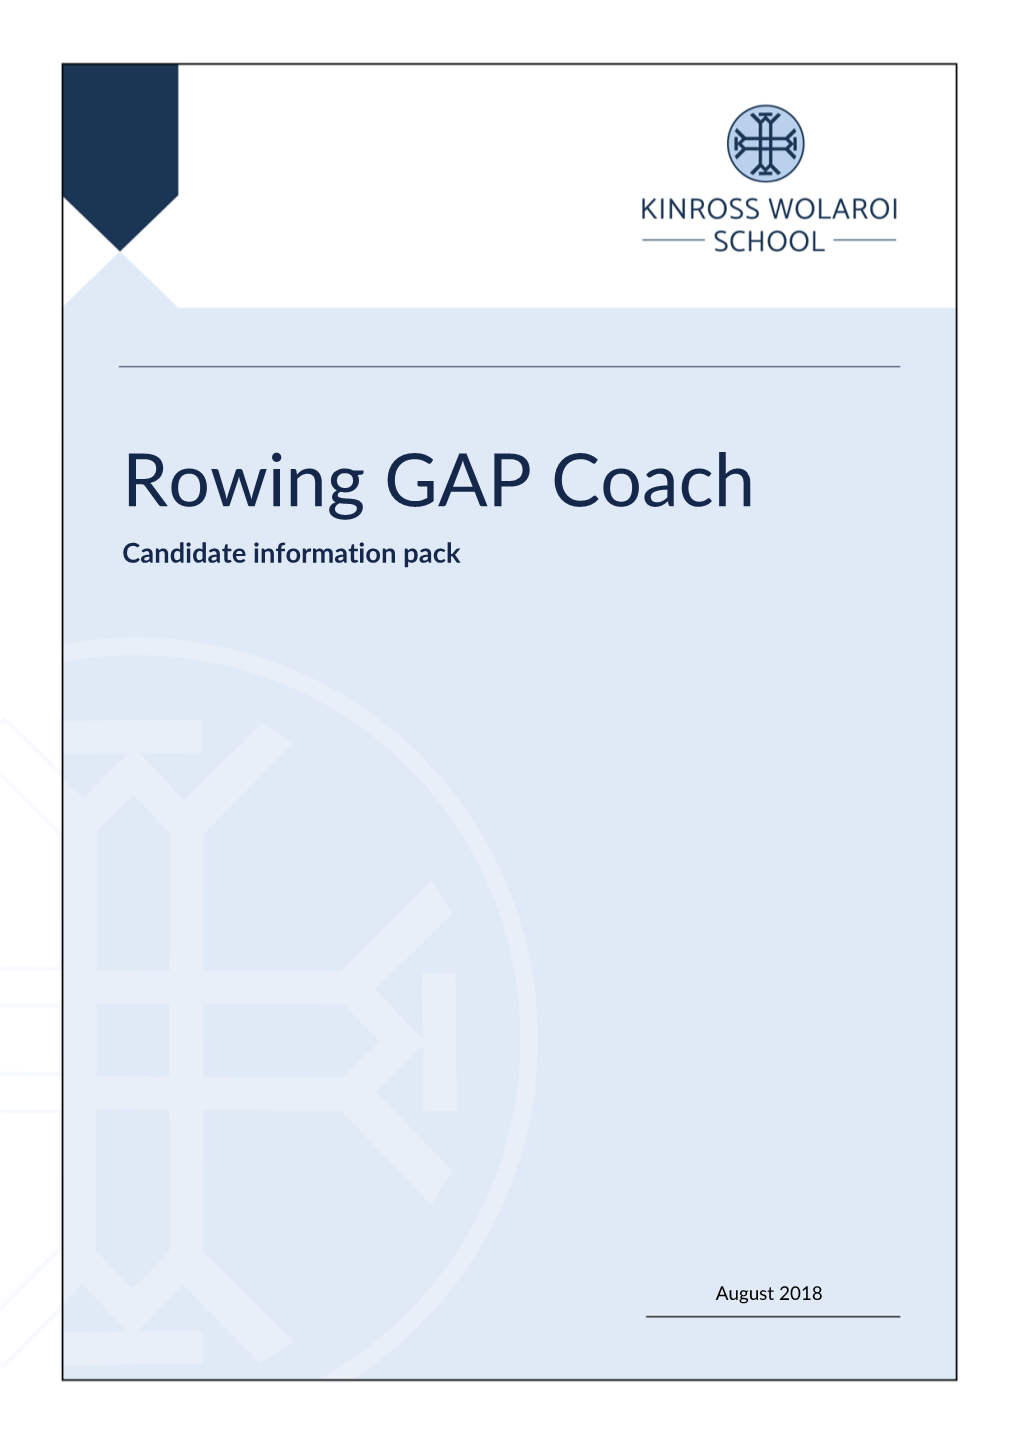 Rowing GAP Coach Candidate Information Pack